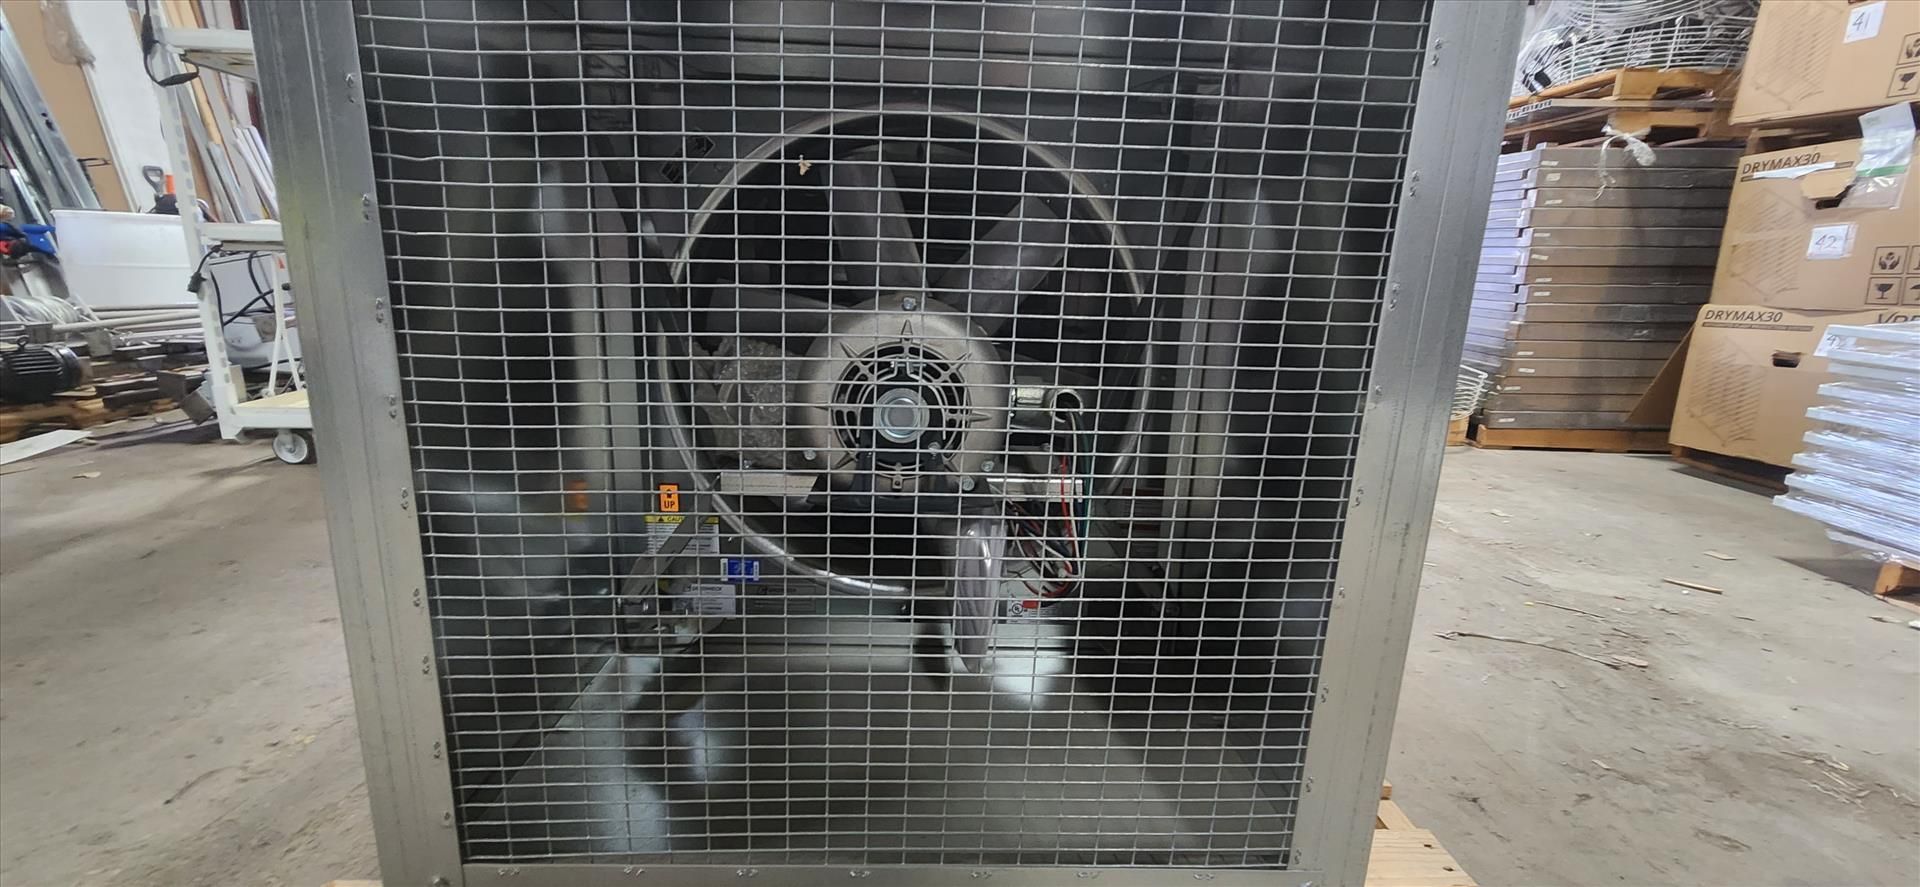 Greenheck supply/exhaust axial fan, mod. AER-E20C-601-C6-X - Image 3 of 3